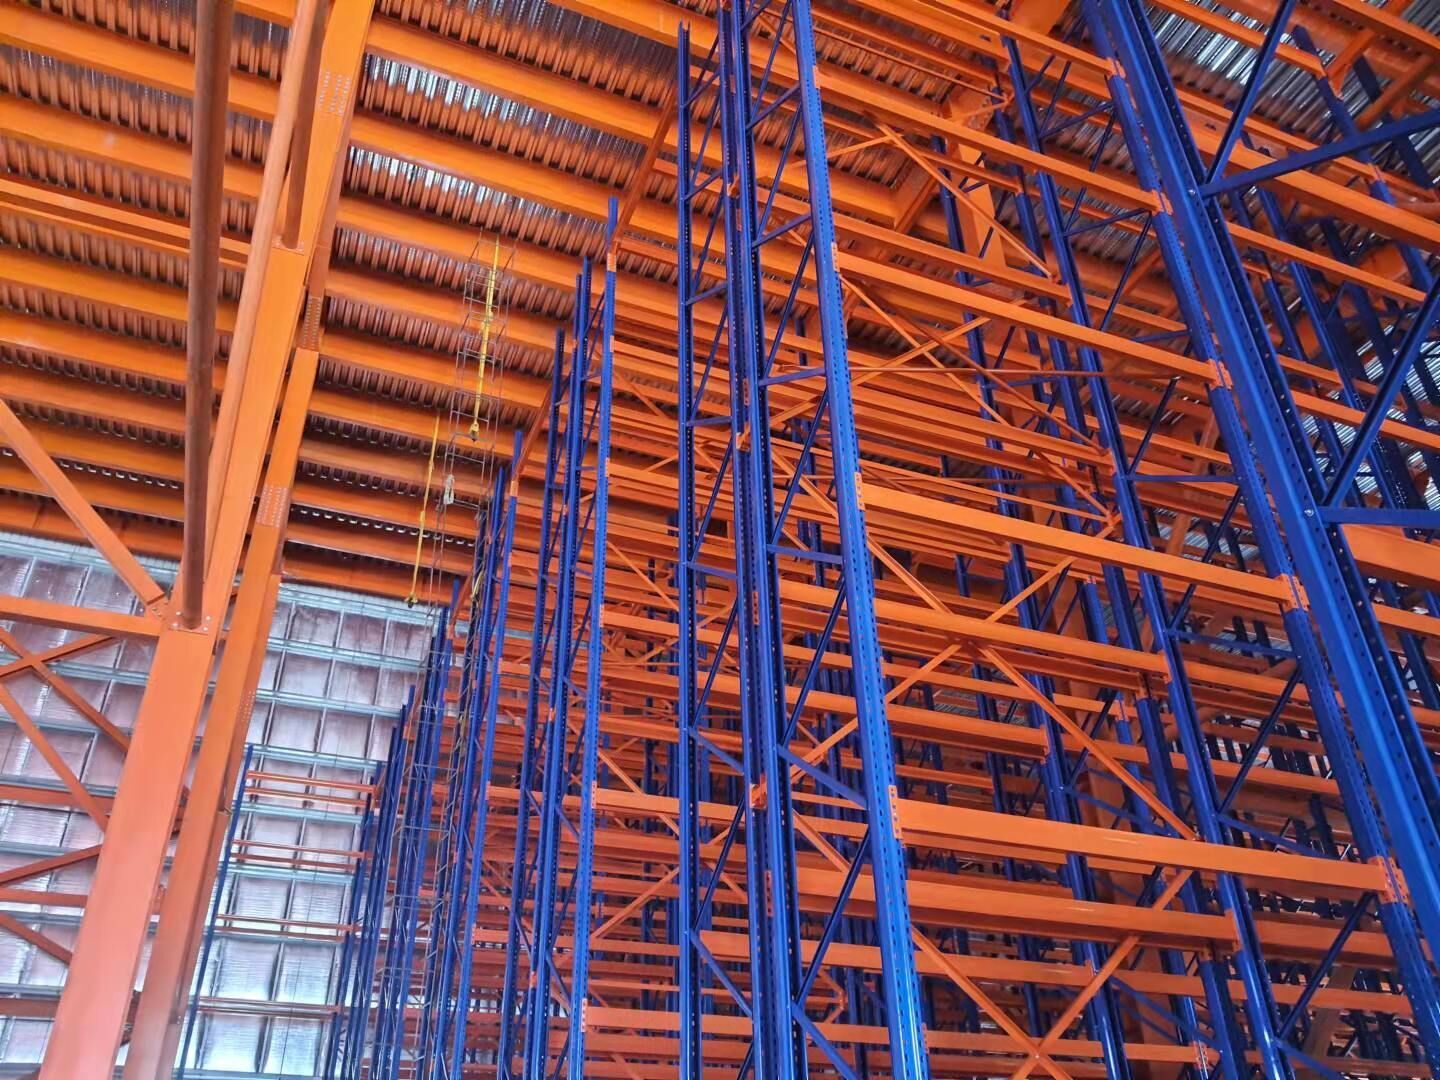 How high can pallet racking go?